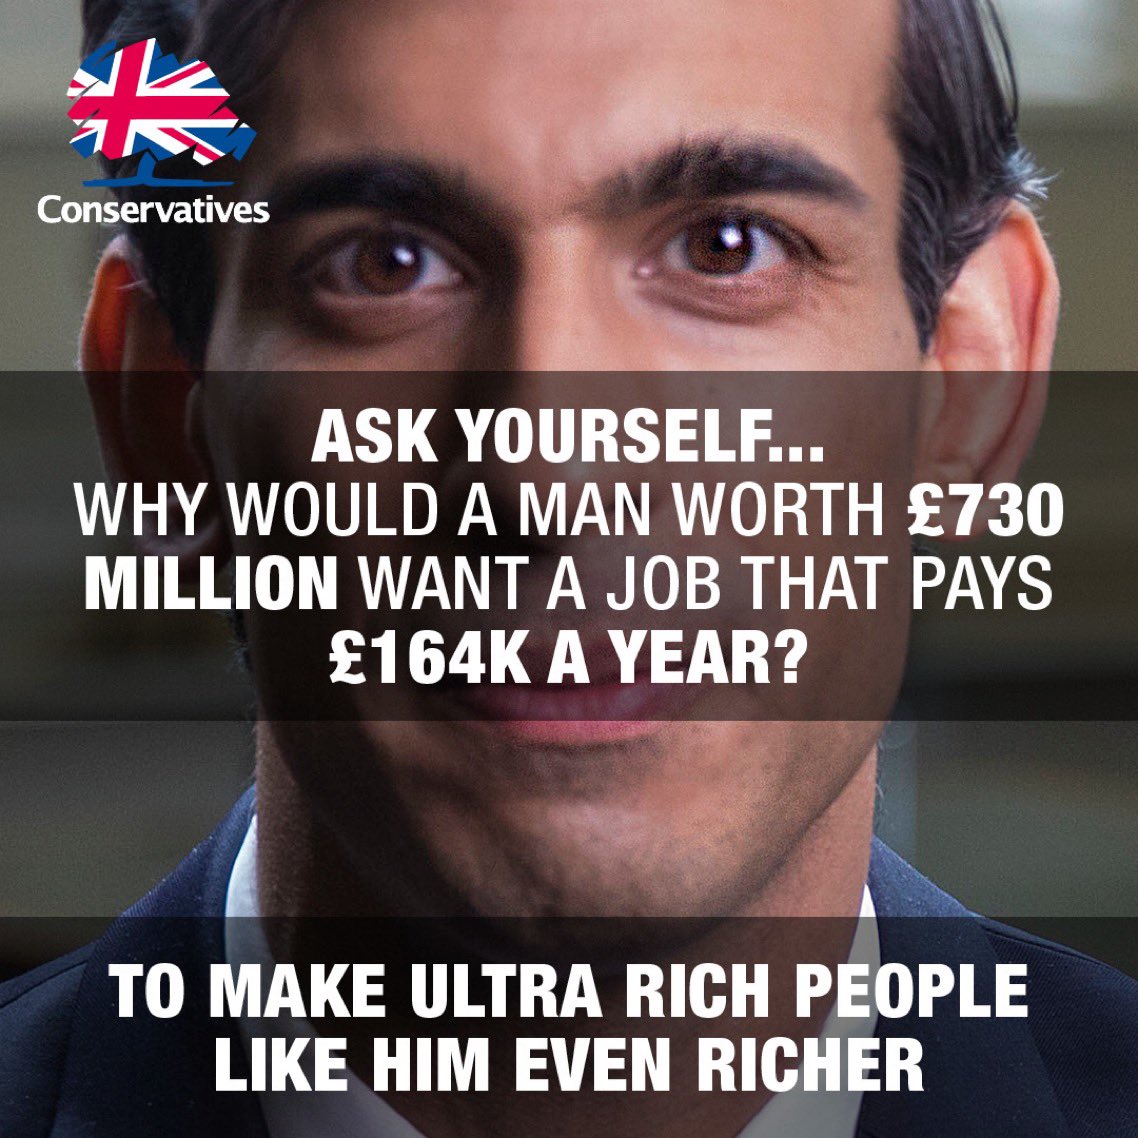 @Haggis_UK @tandoreo SUNAK DOESN’T WANT TO BE A MILLIONAIRE.
HE WANTS TO BE A BILLIONAIRE.